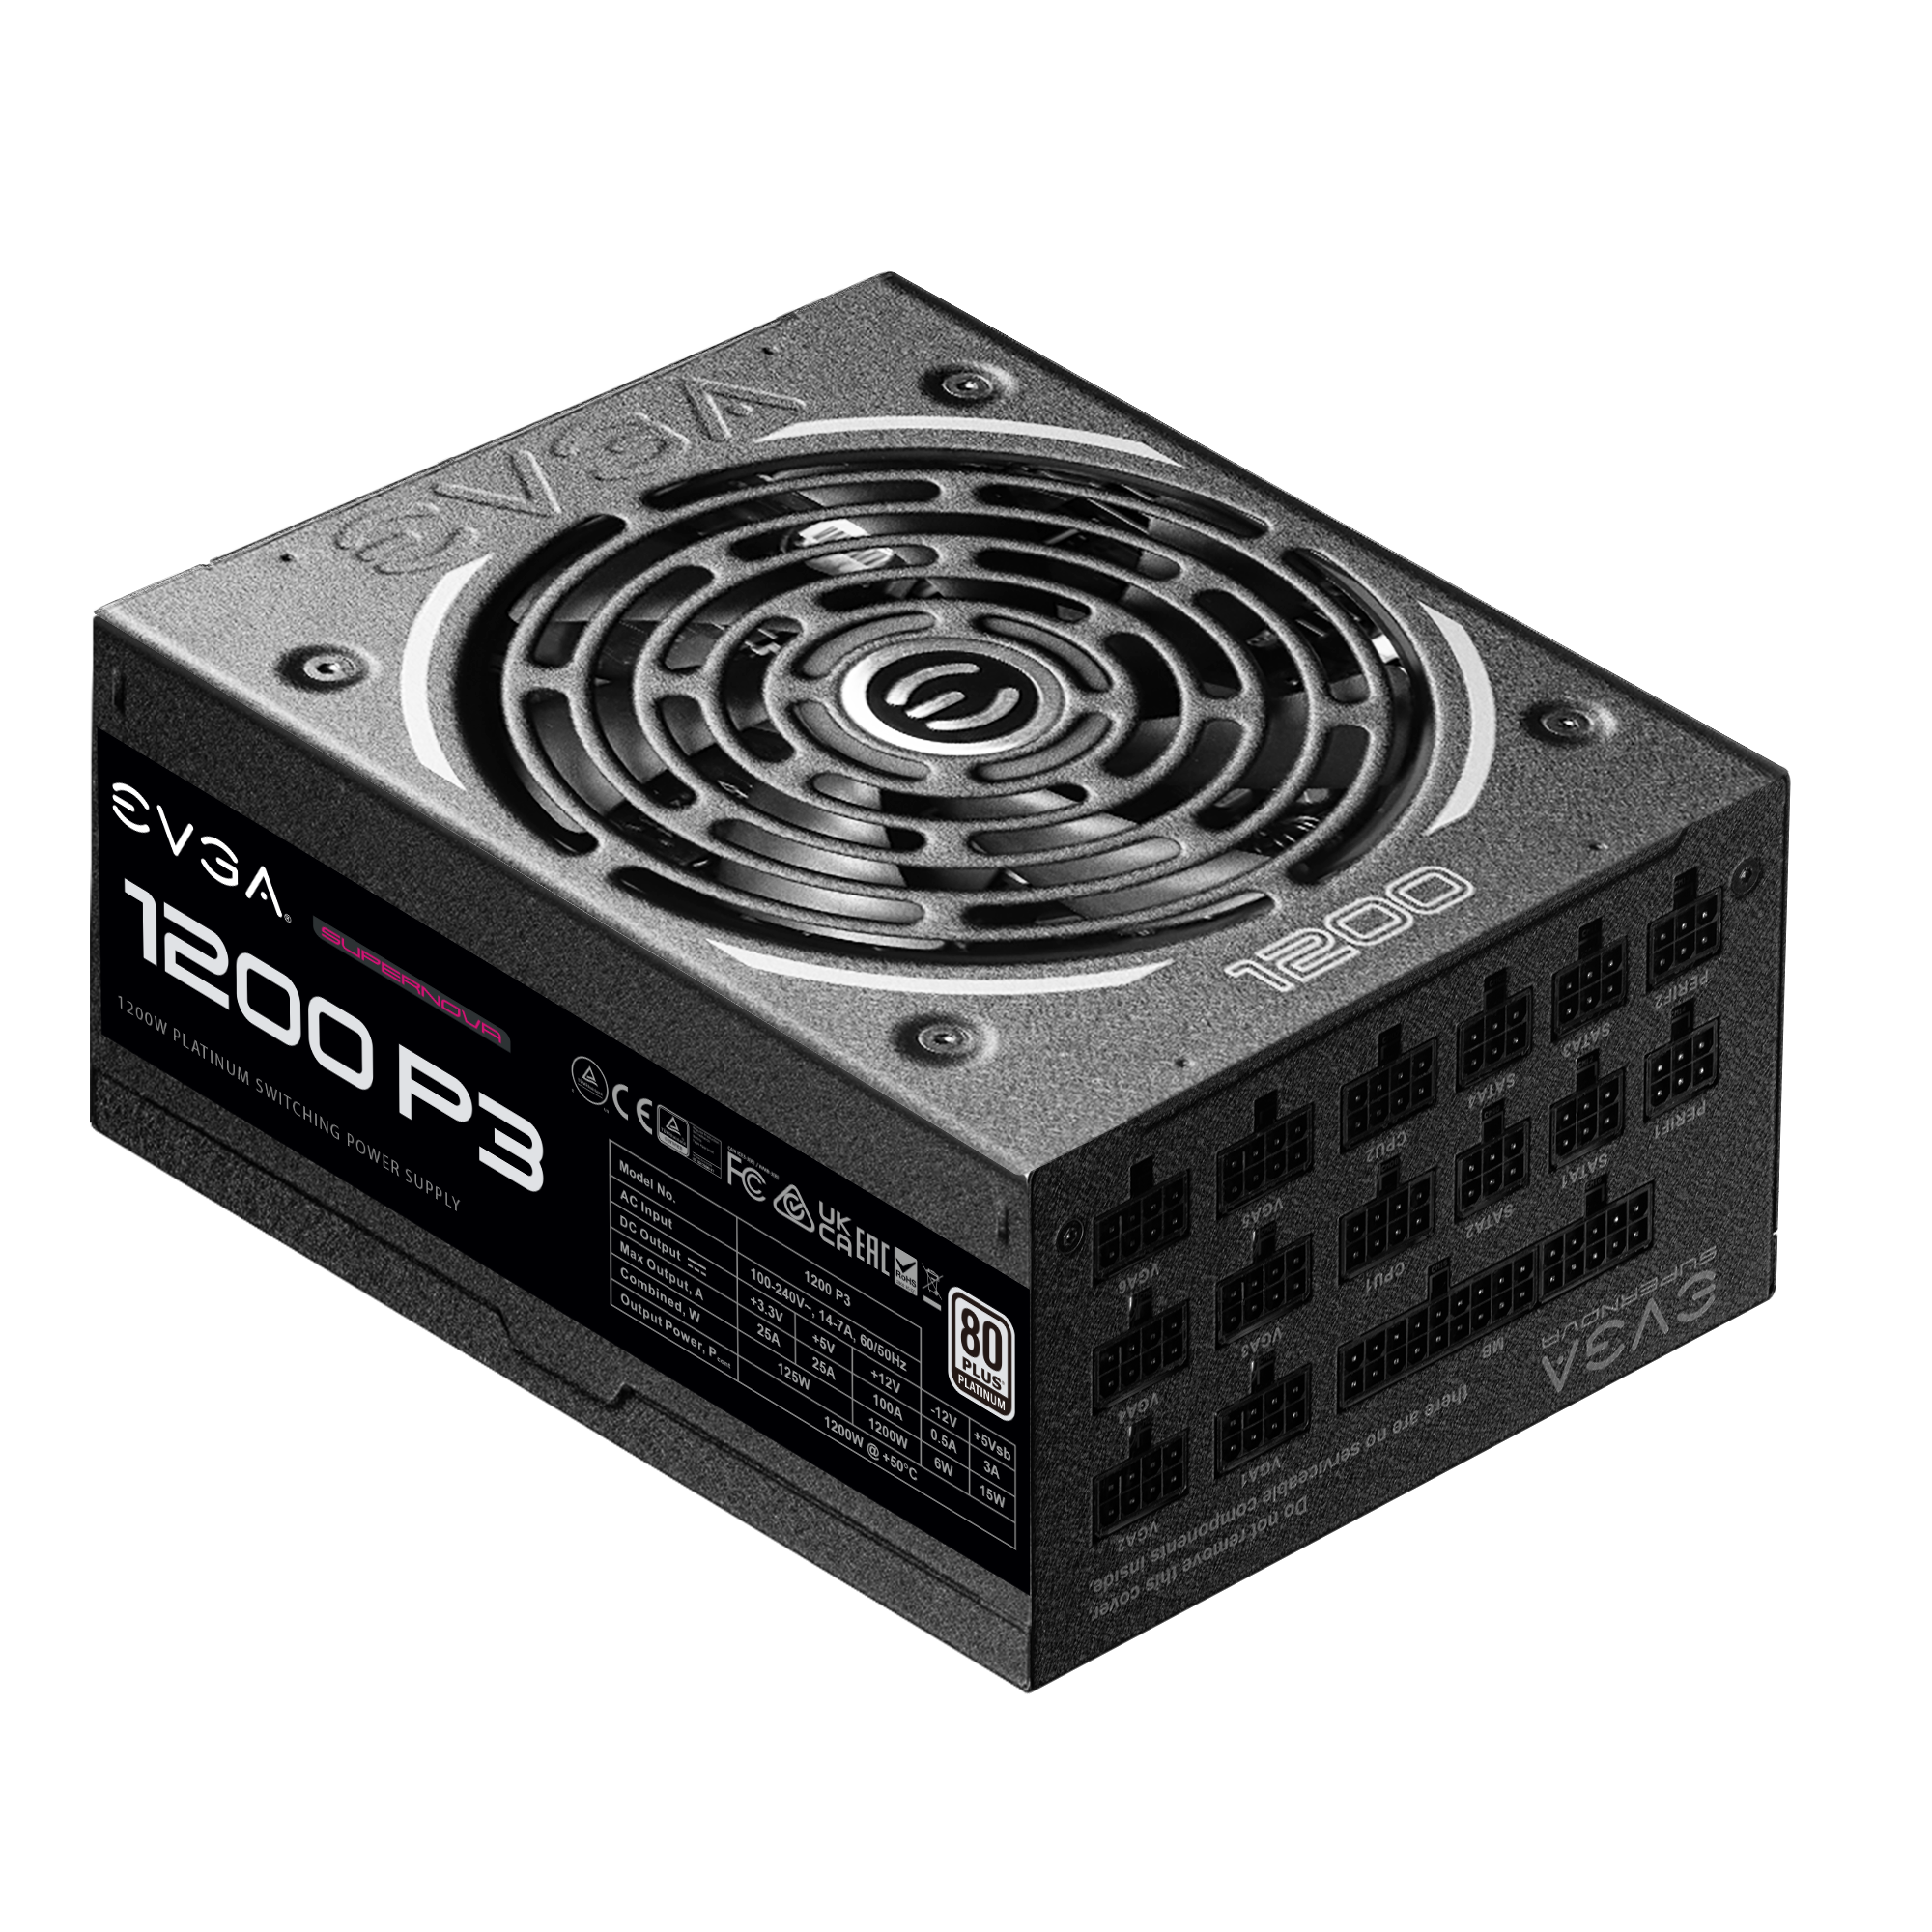 Power Supply 220-P3-1200-X1 Compact 180mm Size 80 Plus Platinum 1200W Fully Modular EVGA Supernova 1200 P3 Includes Free Power On Self Tester Eco Mode with FDB Fan 